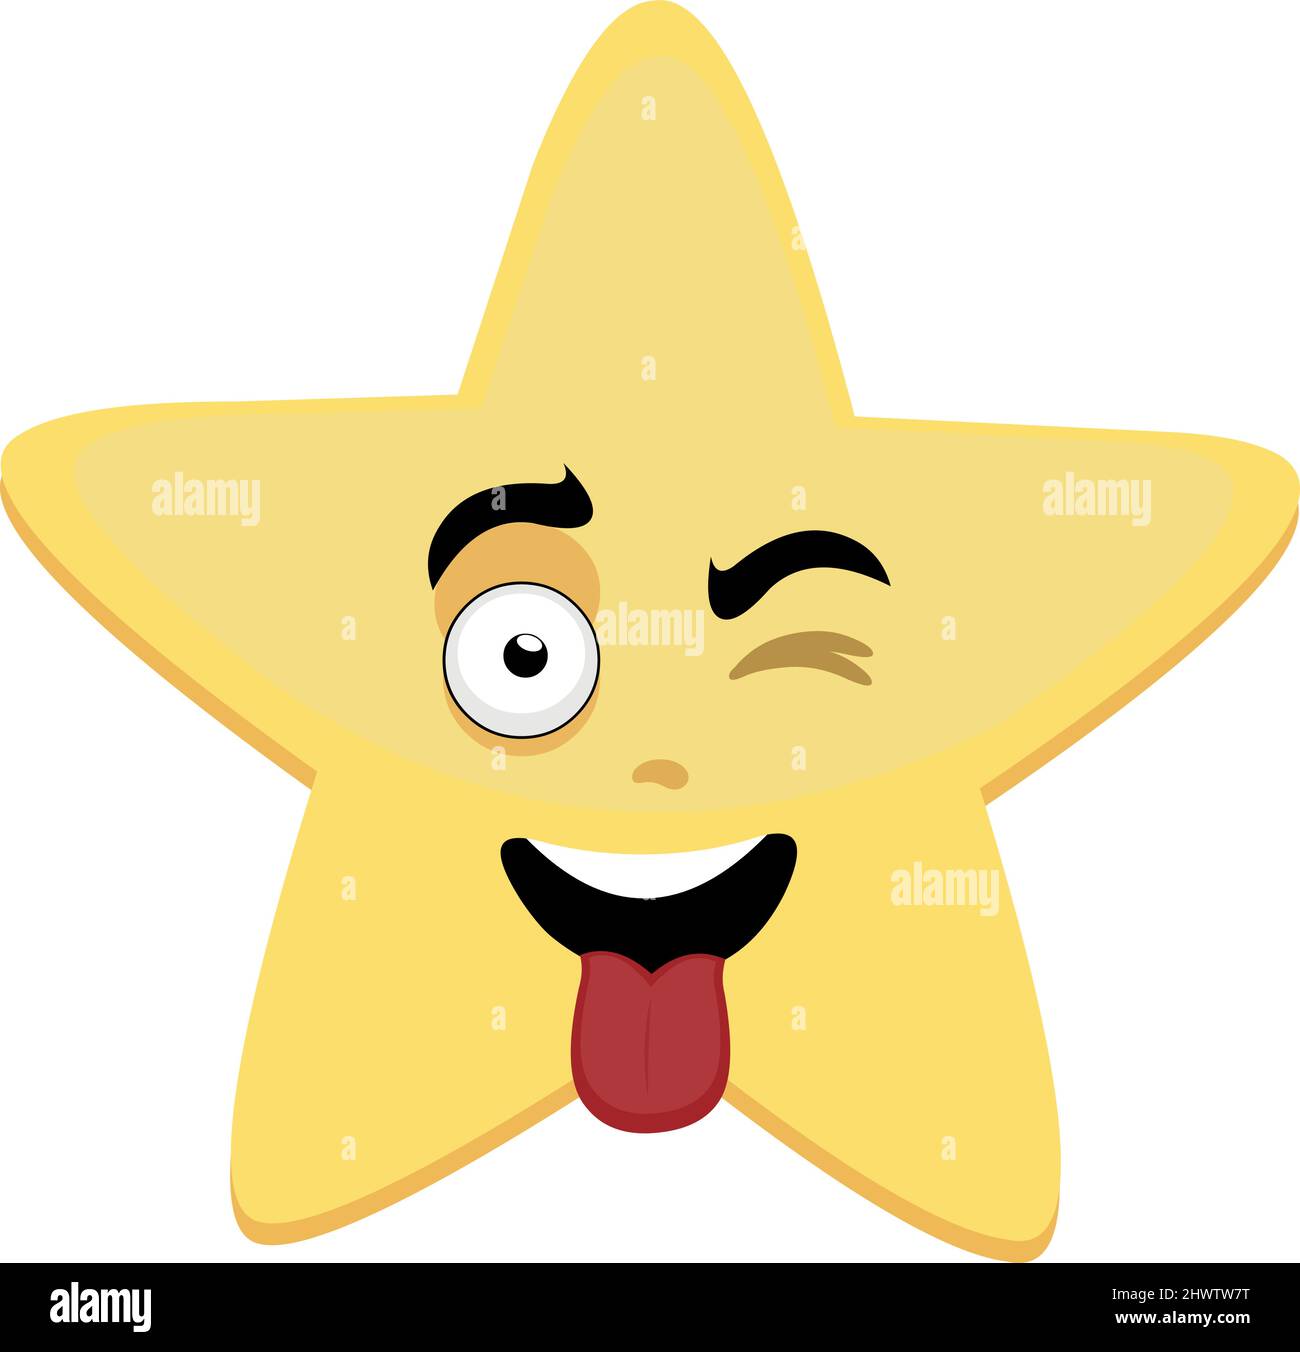 Vector cartoon character illustration of a star, winking and with his tongue out Stock Vector